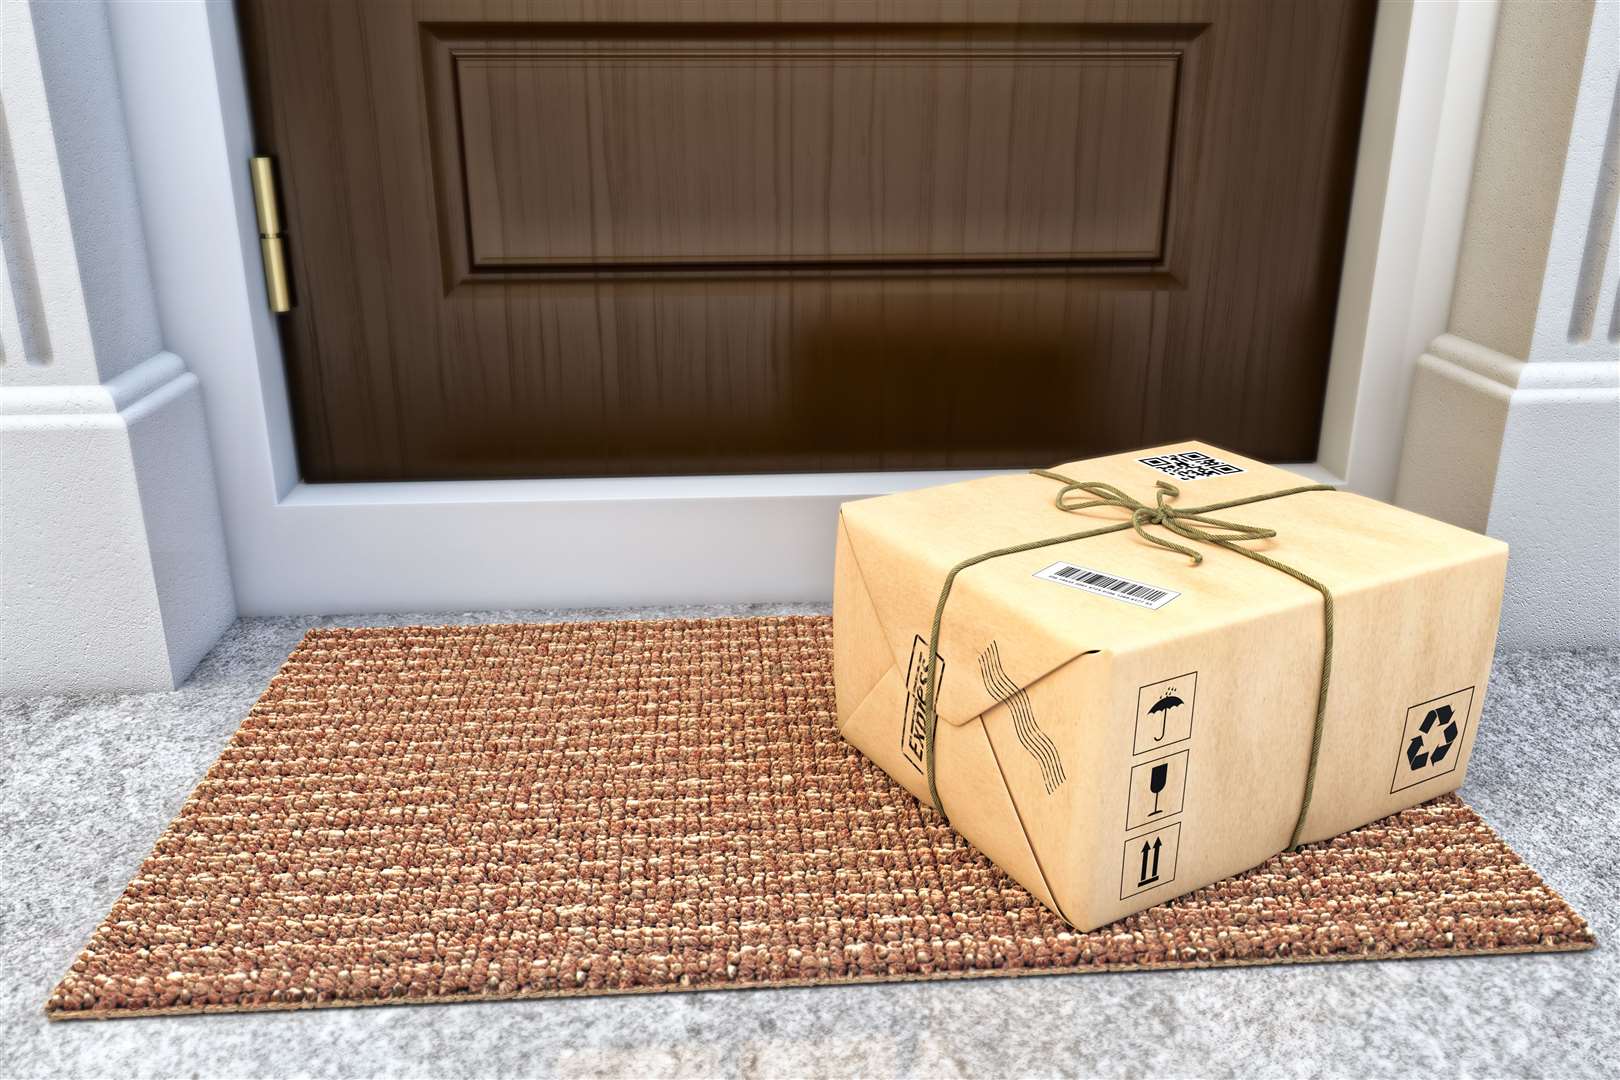 Parcels left on the doorstep are proving a temptation for thieves. Stock image